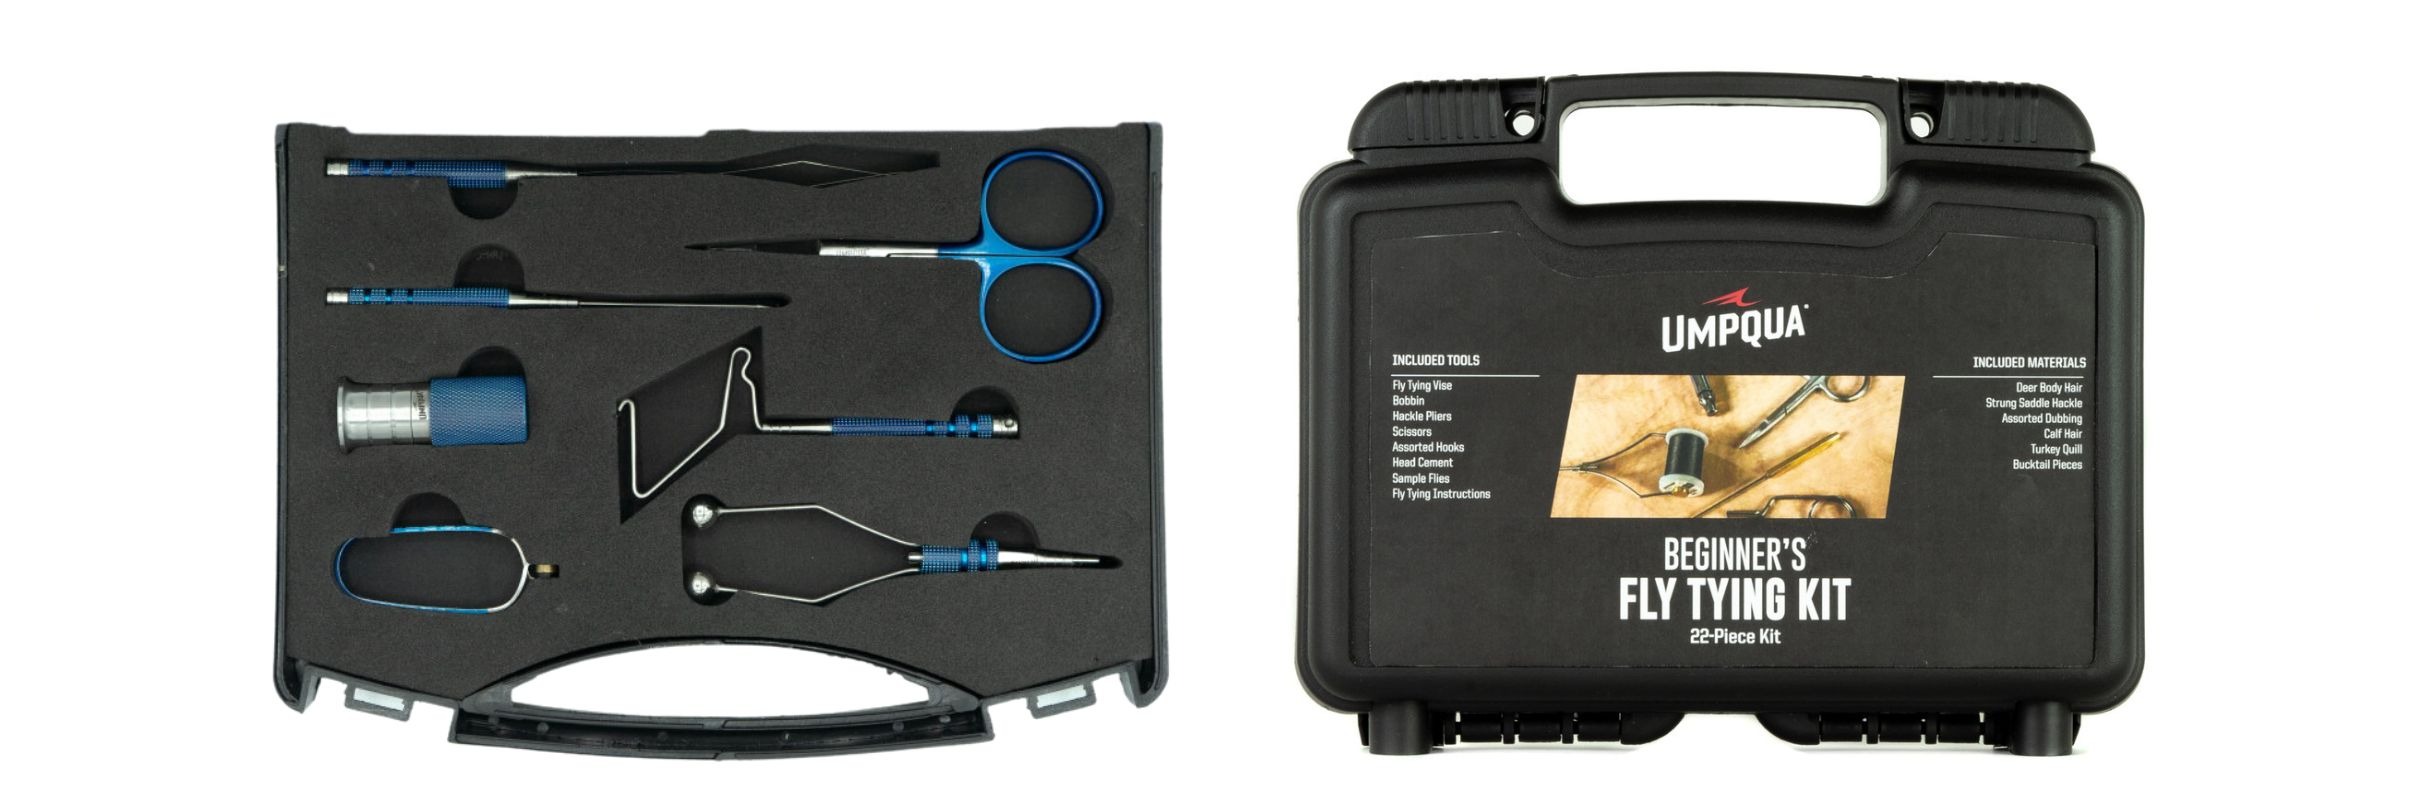 Shop Fly Tying Kits: Beginner, Travel, and Expert Kits